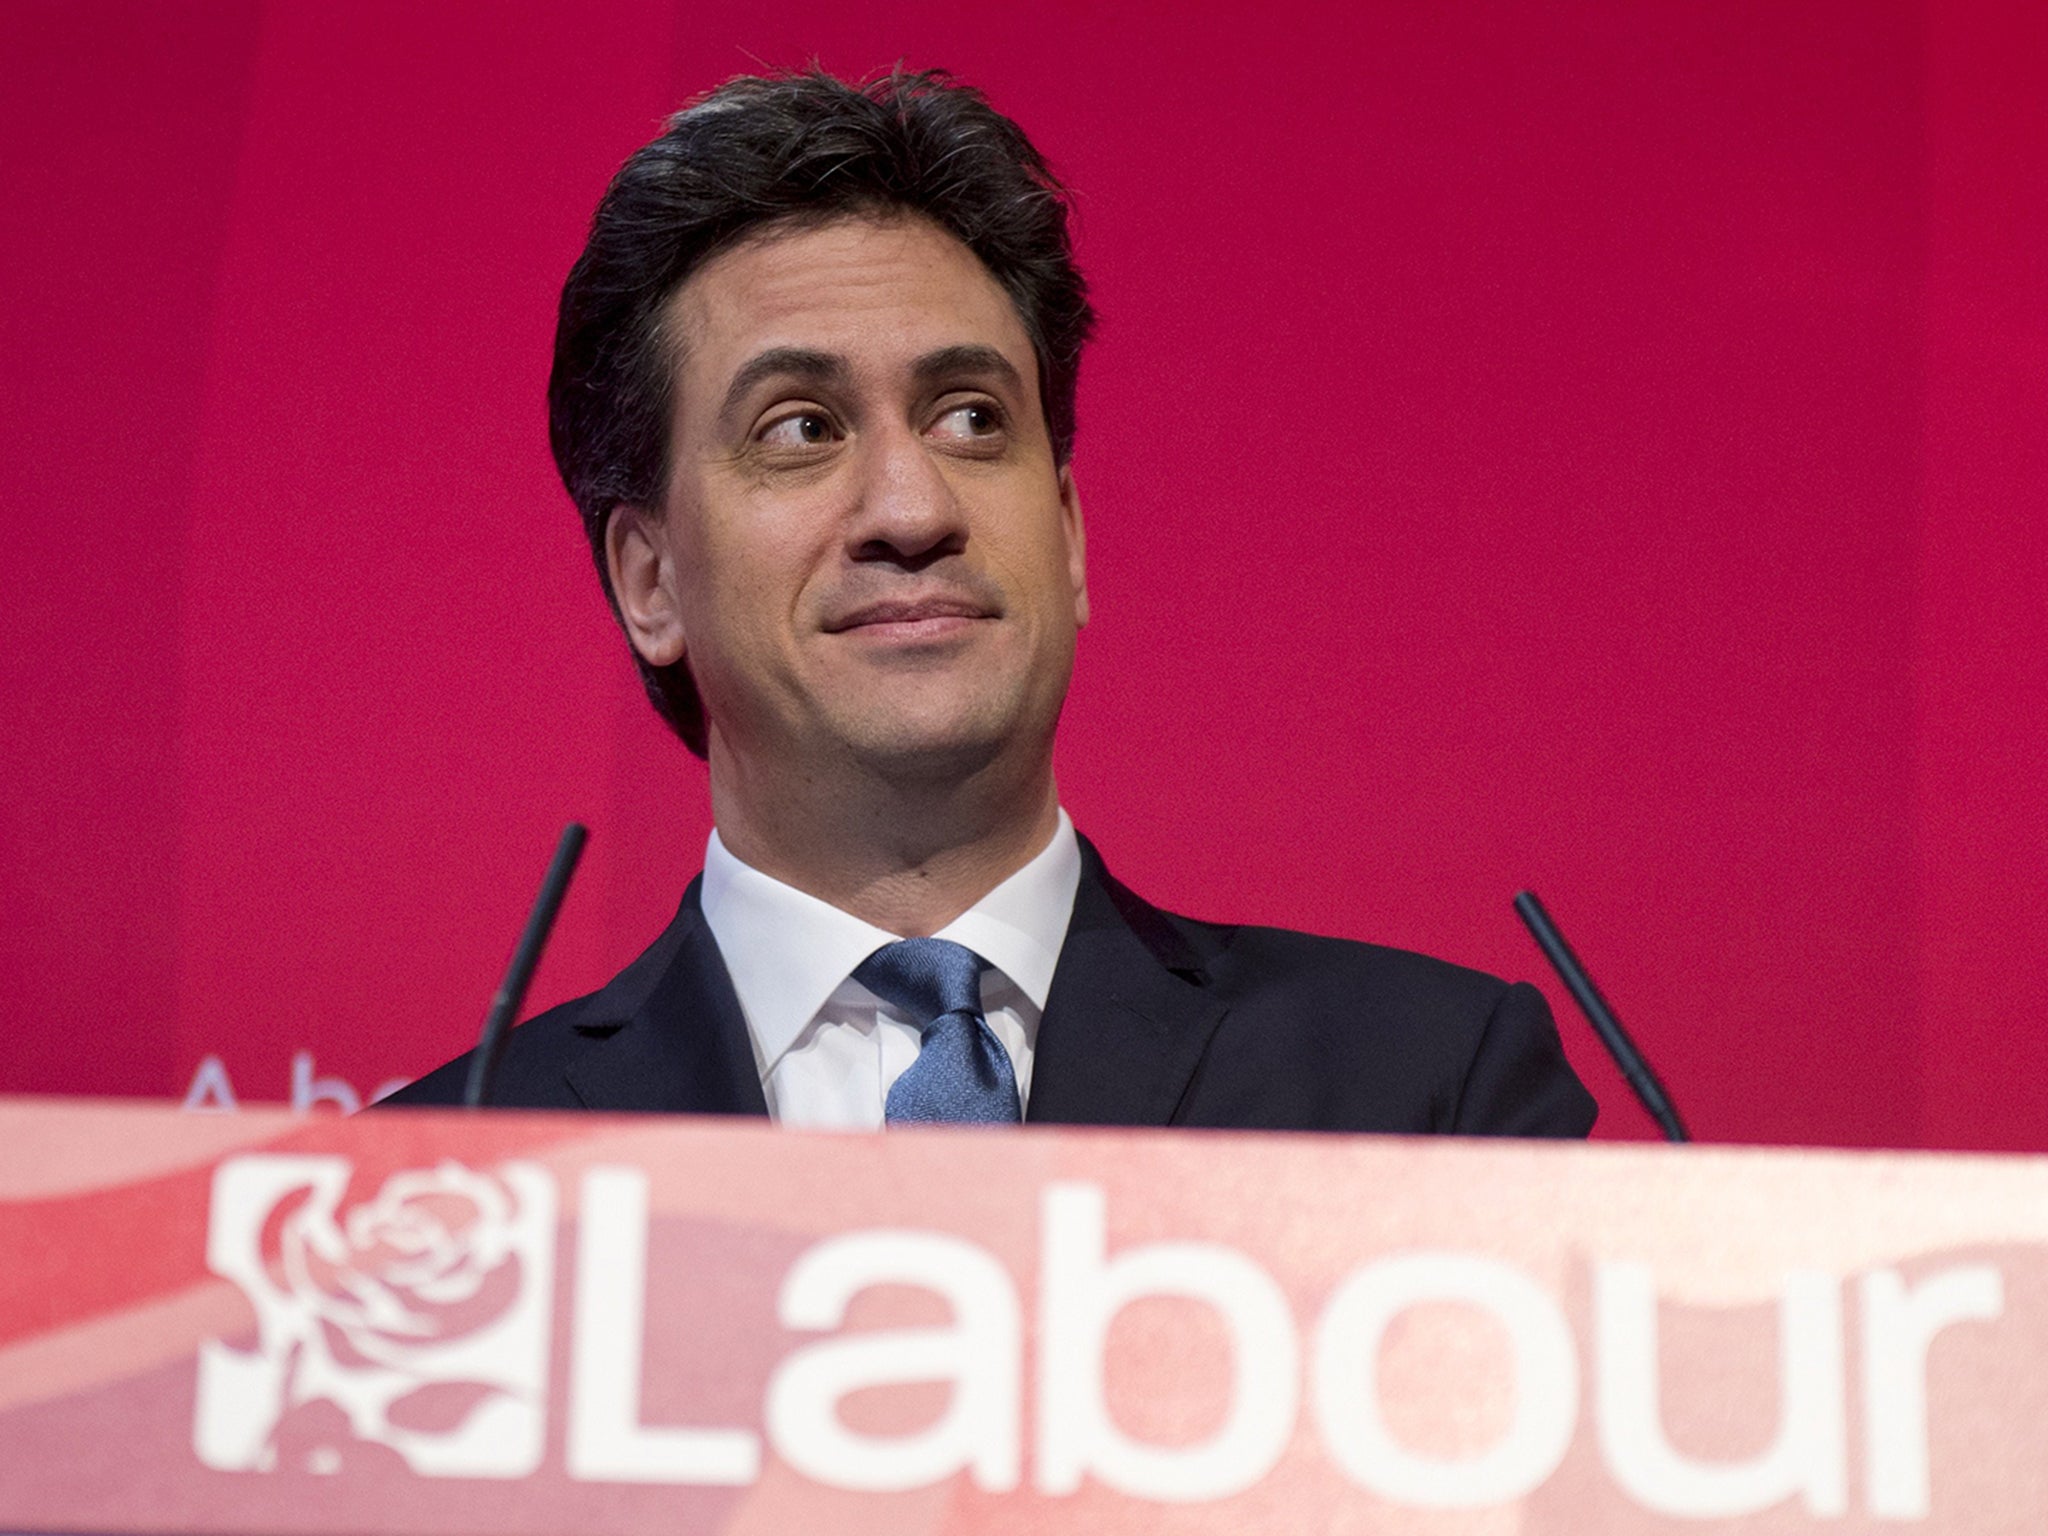 Ed Miliband describes himself as a Jewish Atheist